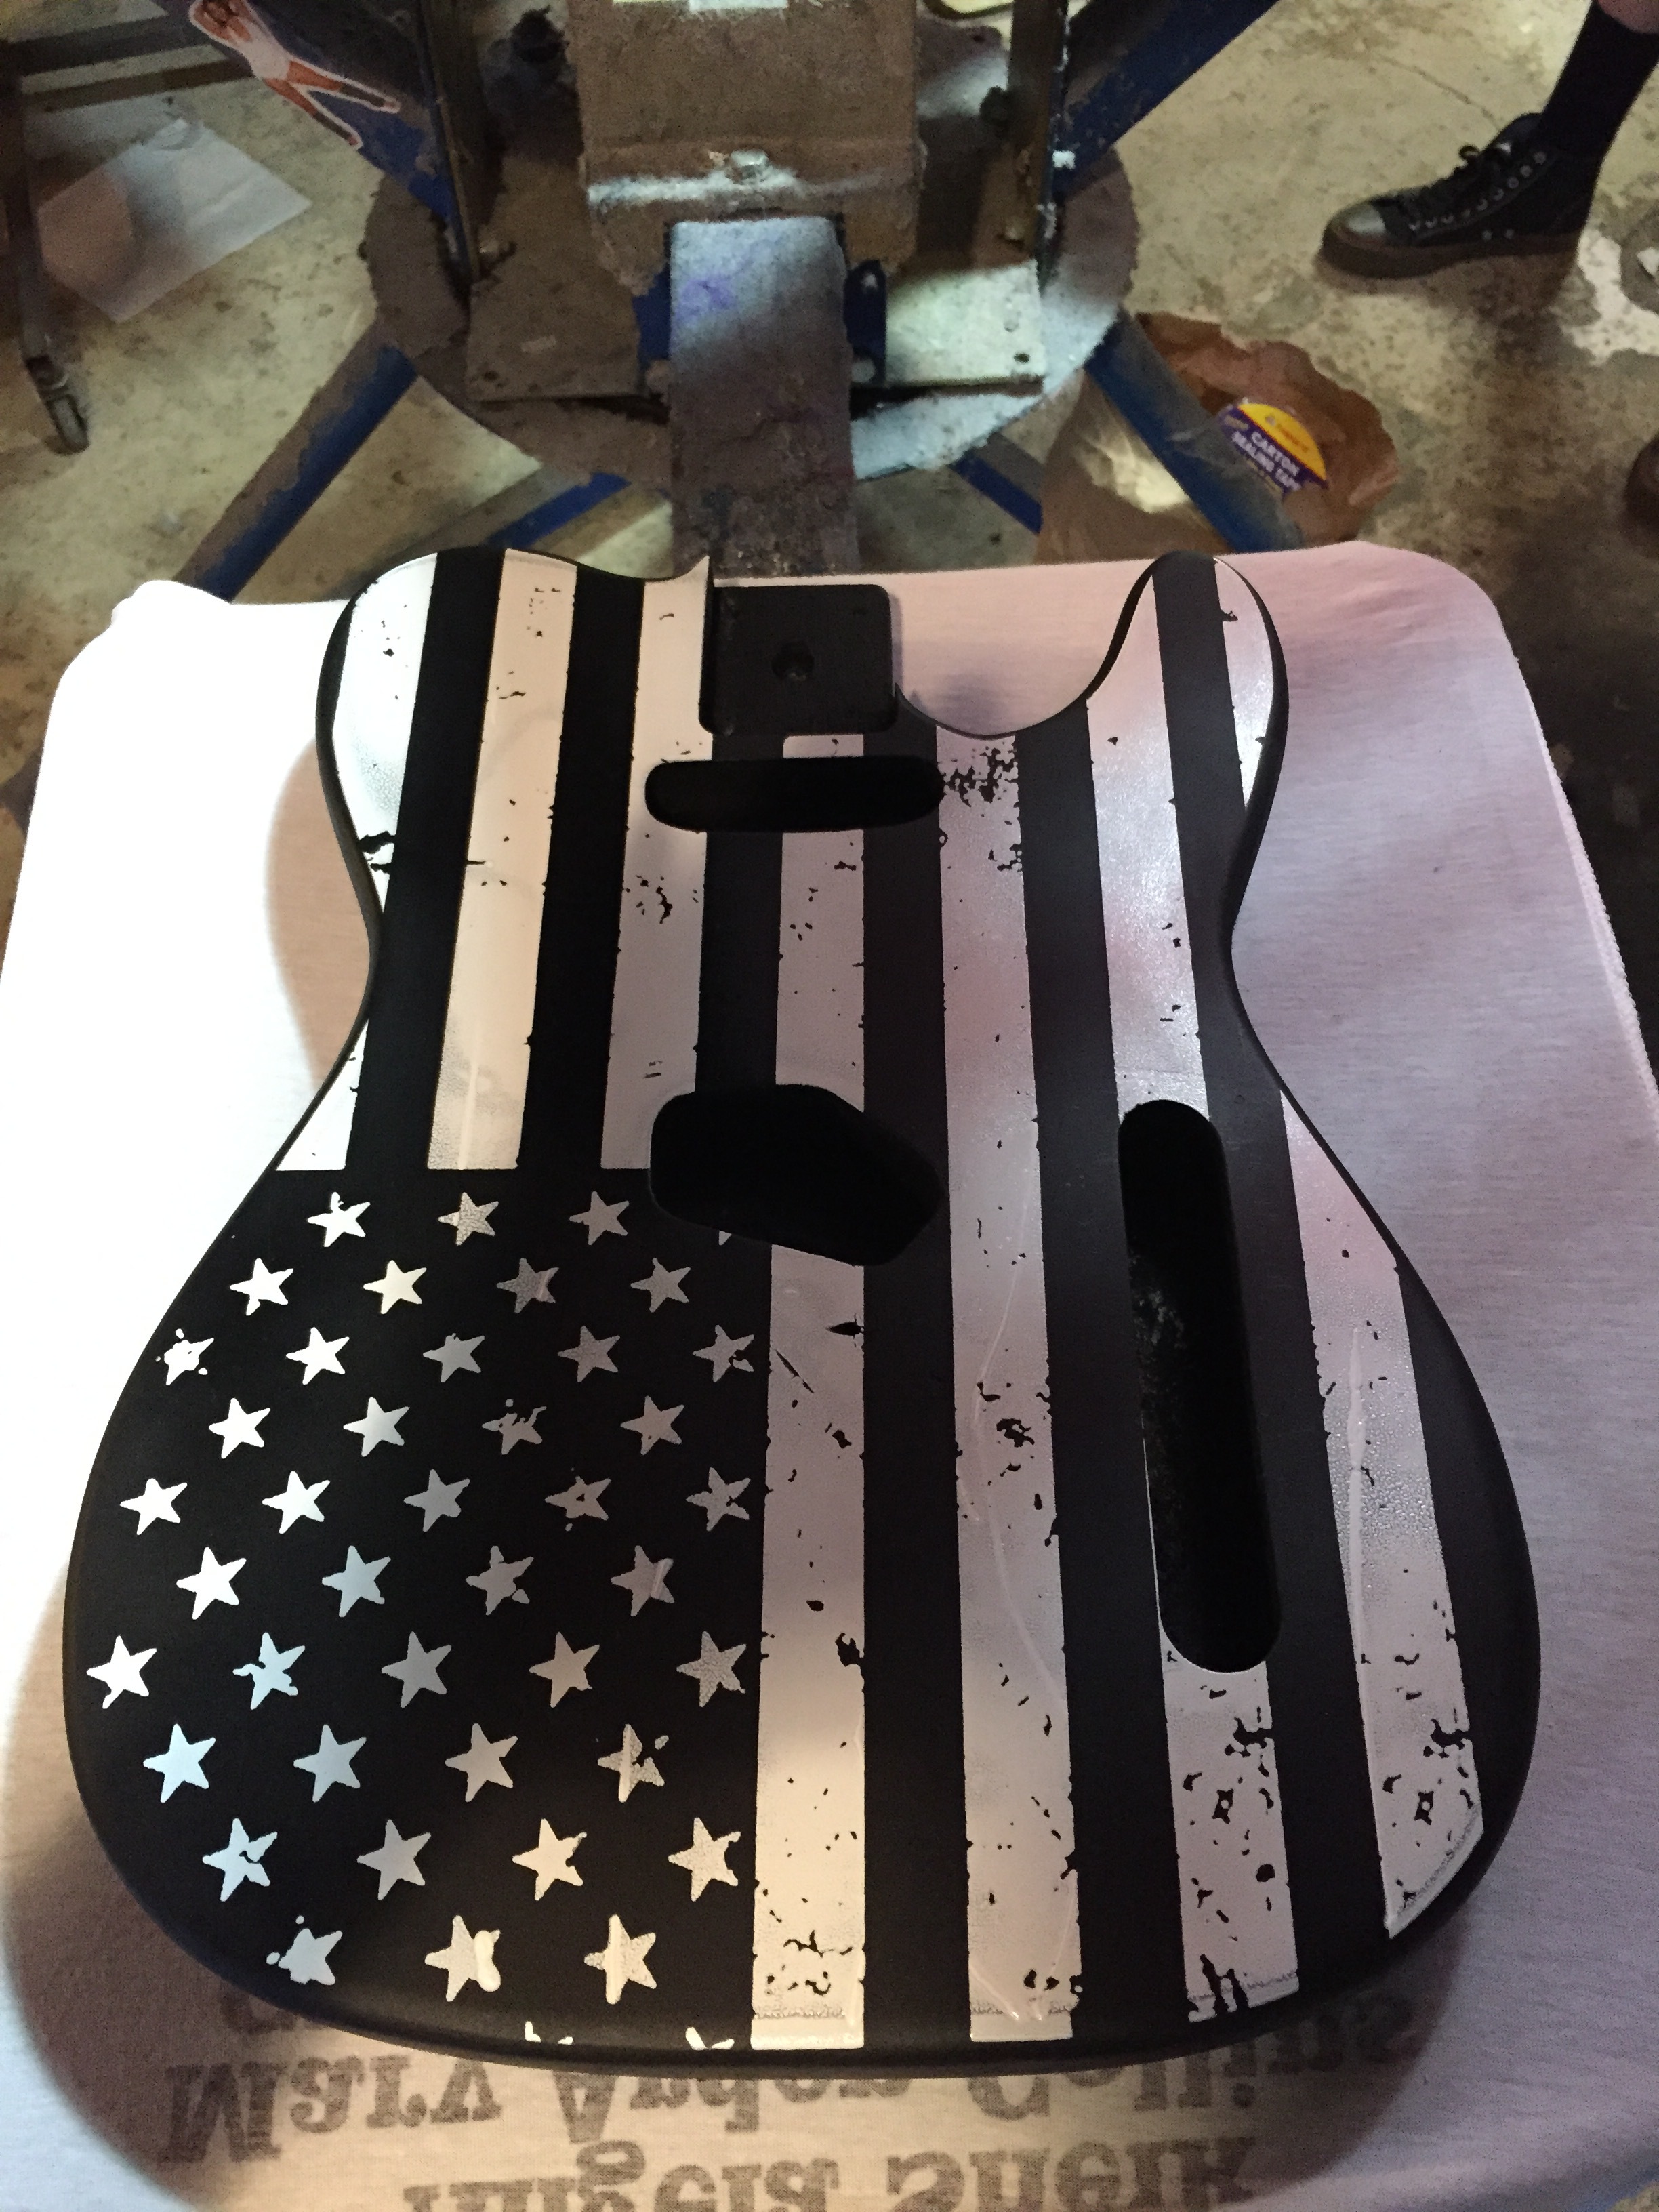   Screen print on wooden guitar body. Project I did with my friends at Matt  y Crist Guitar Works.  